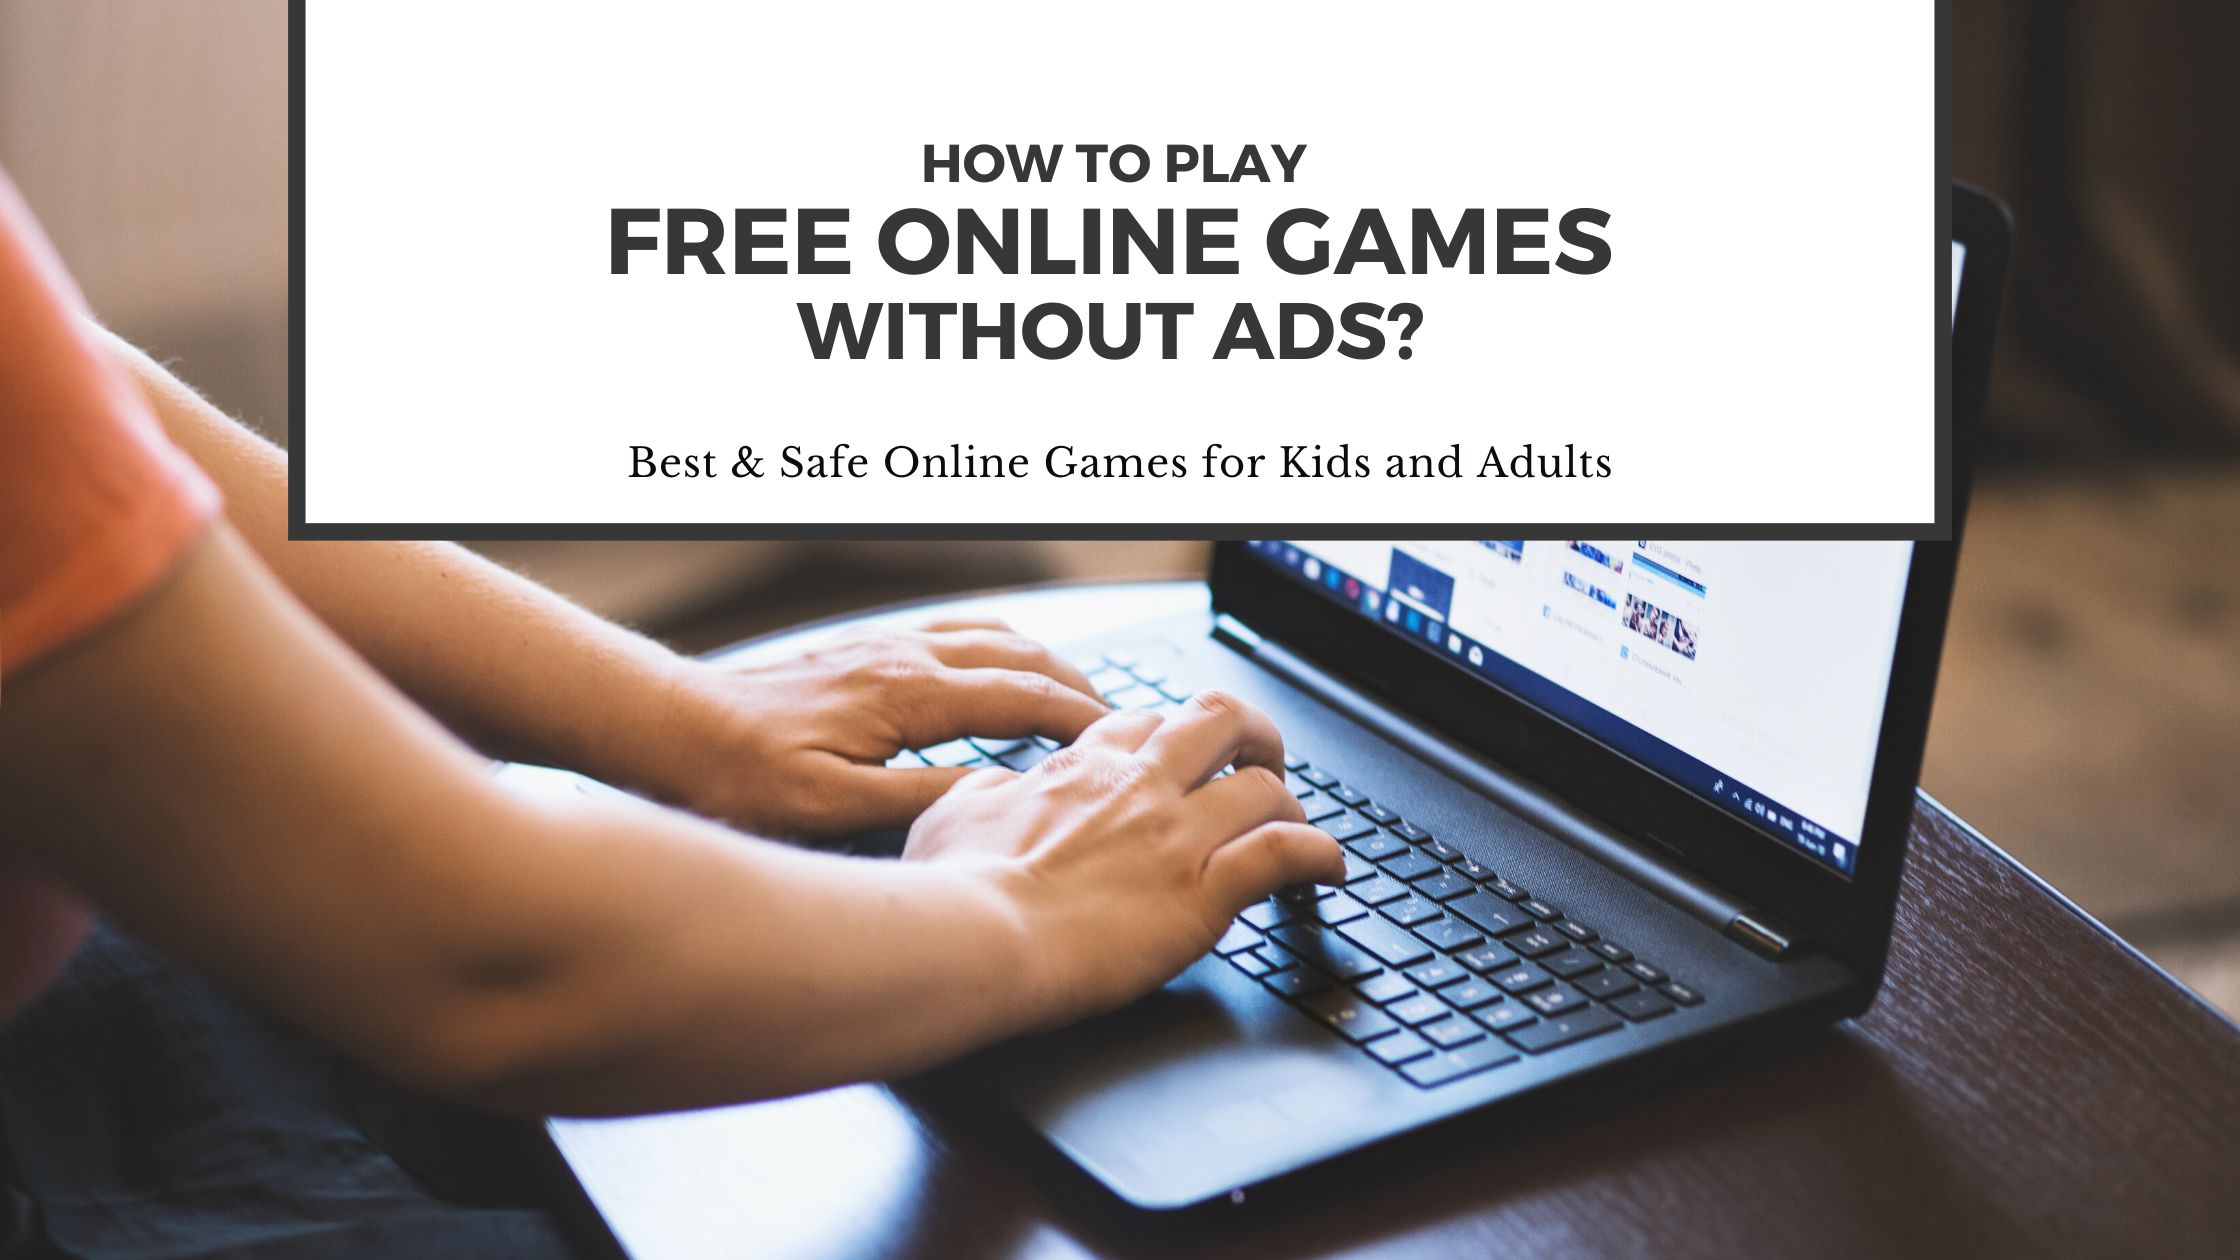 Are free online games safe?